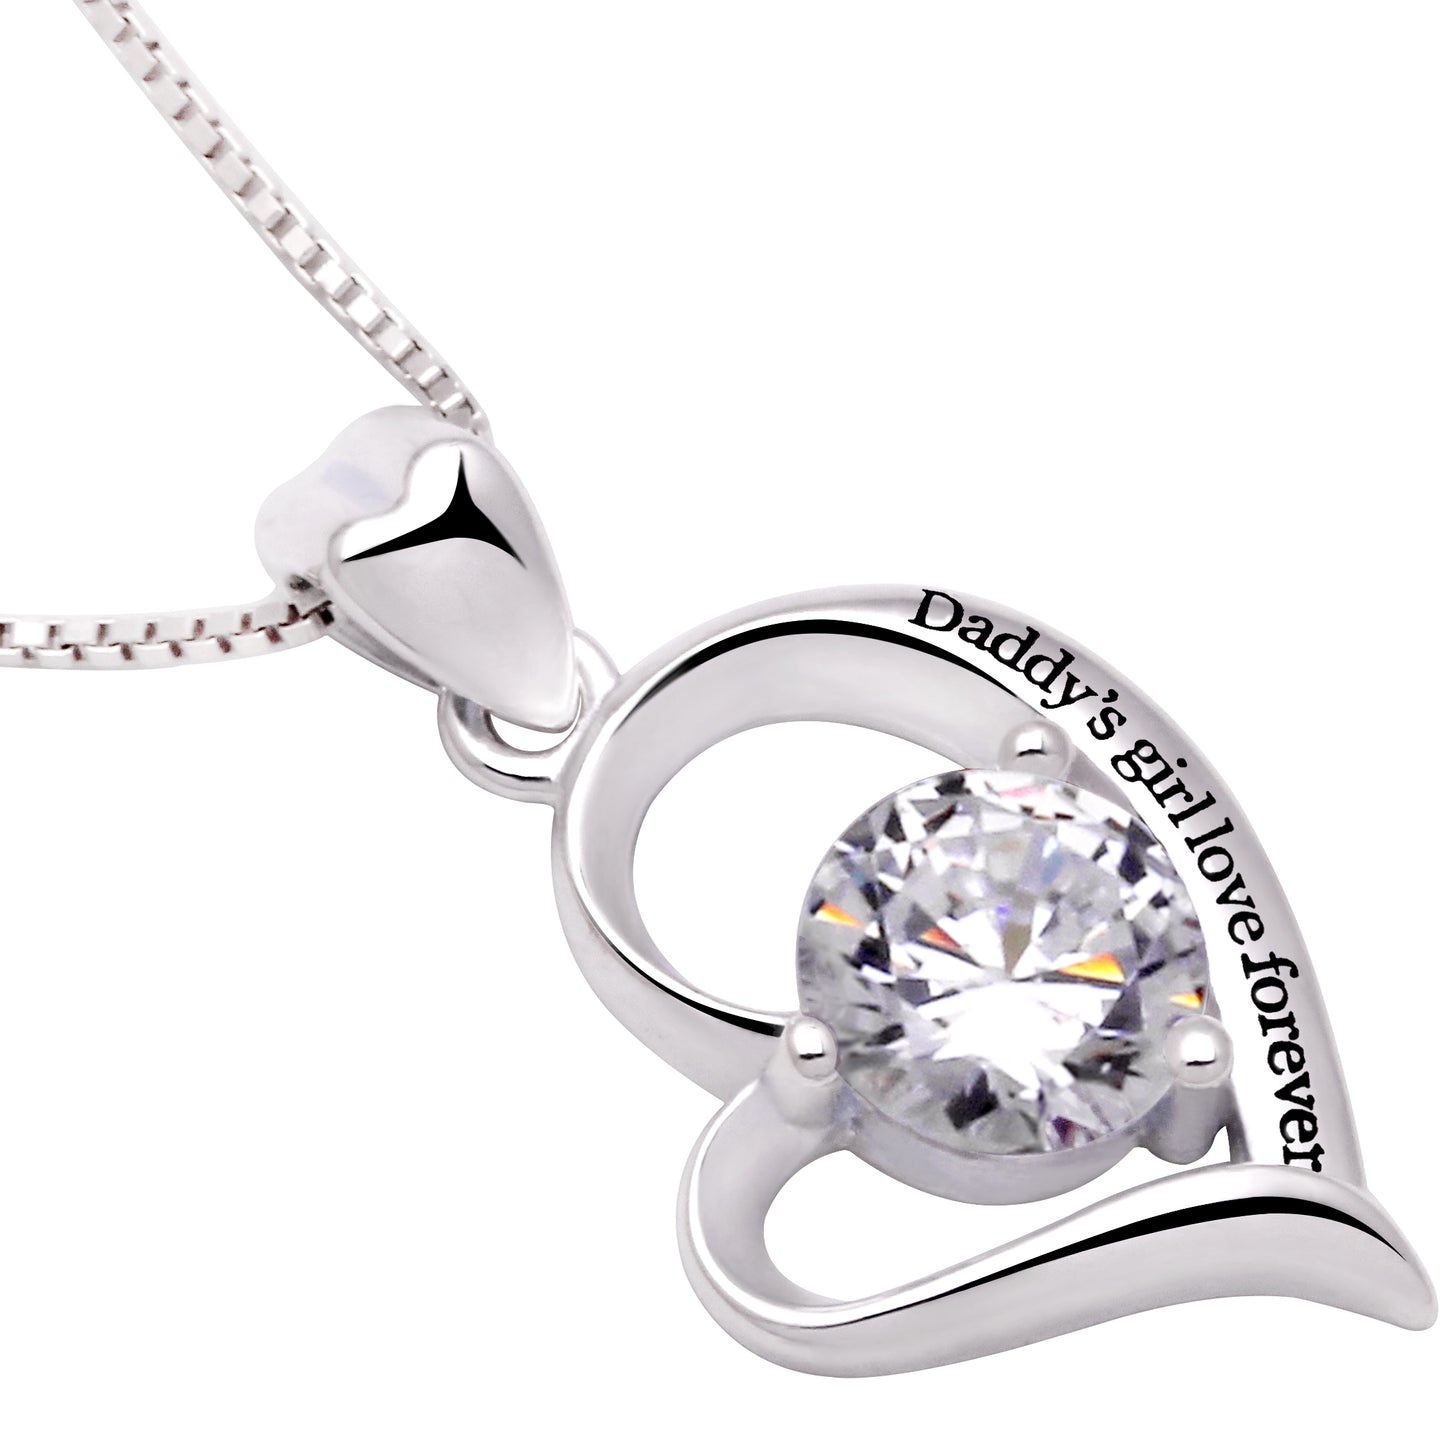 ALOV Jewelry Sterling Silver "Daddy's girl love forever" Love Heart Cubic Zirconia Pendant Necklace